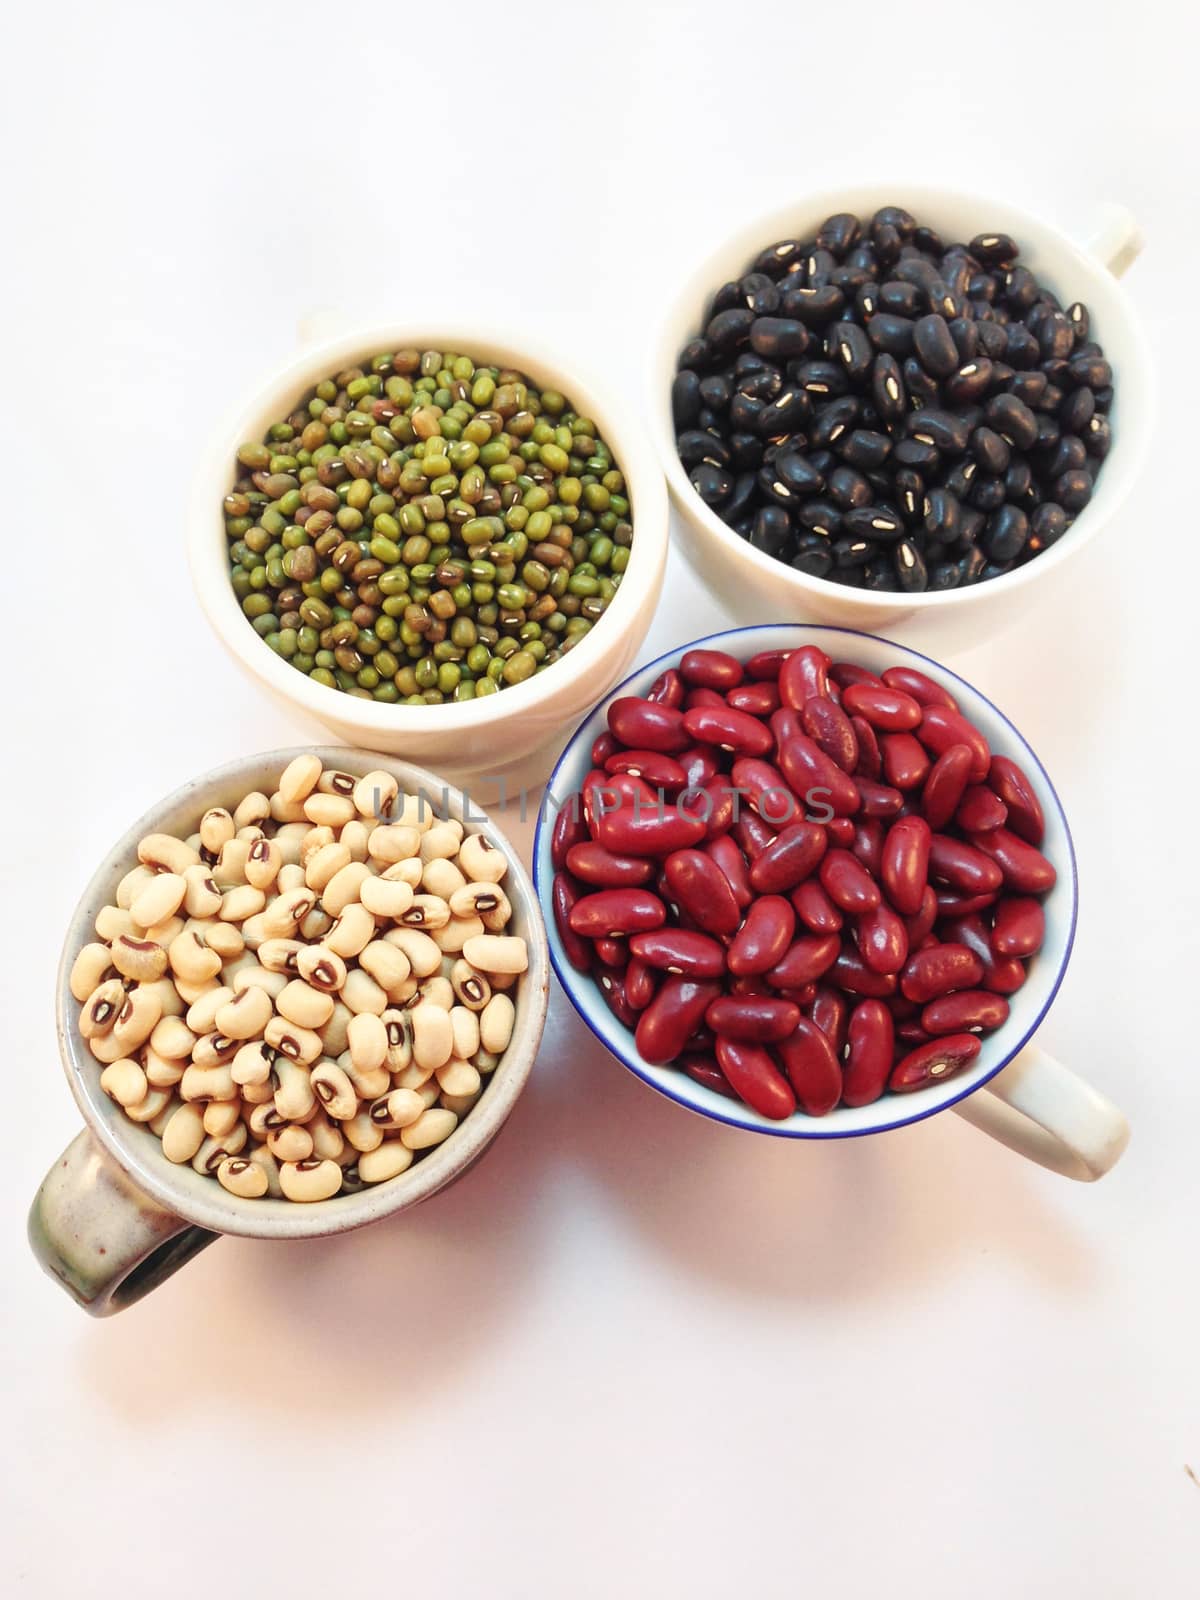 Black eye peas, mung beans, black beans and red kidney beans in a cup on white background